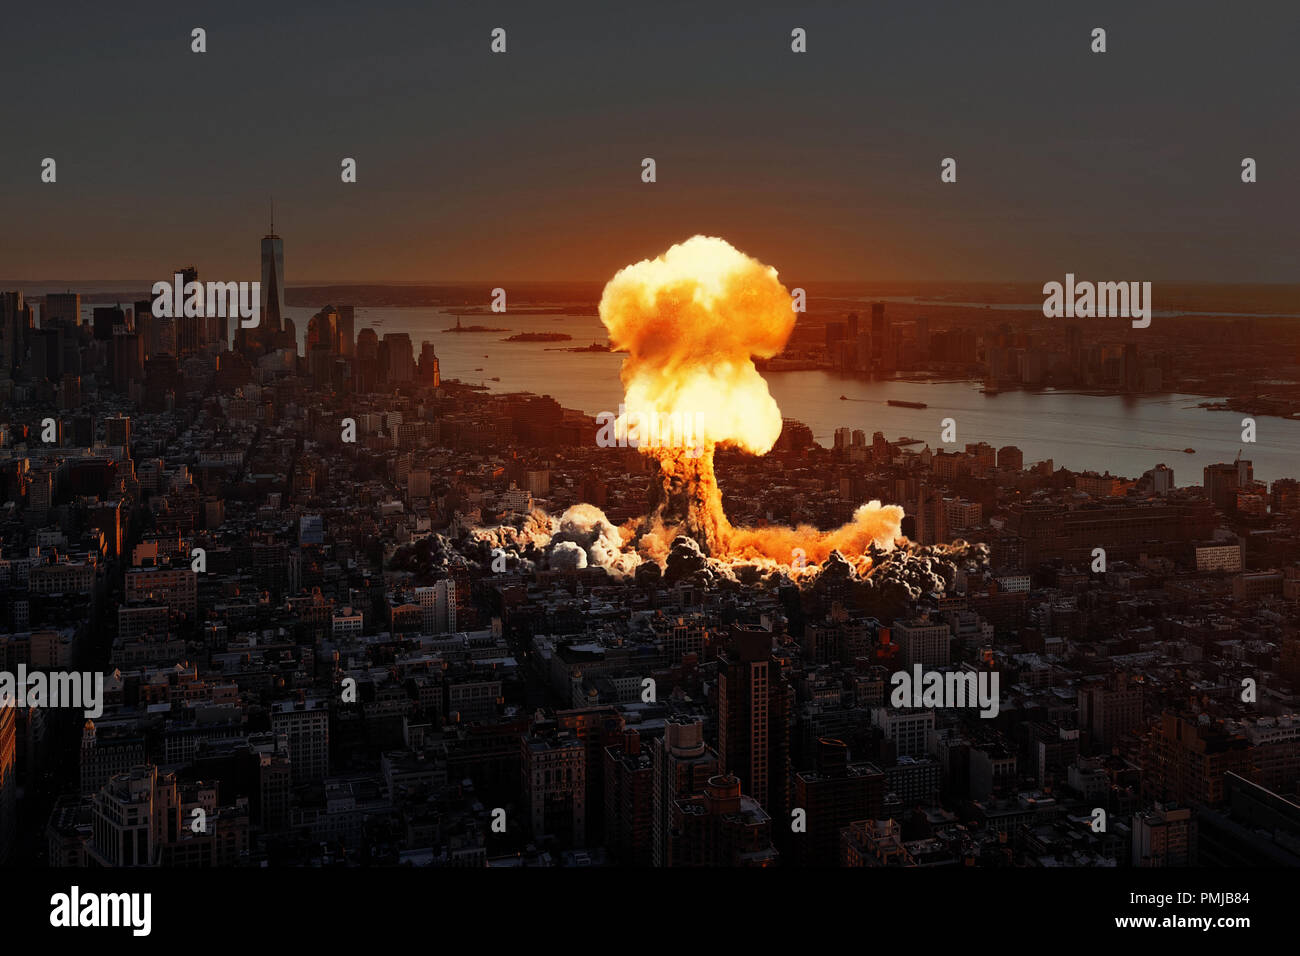 Nuclear explosion in the city. Stock Photo